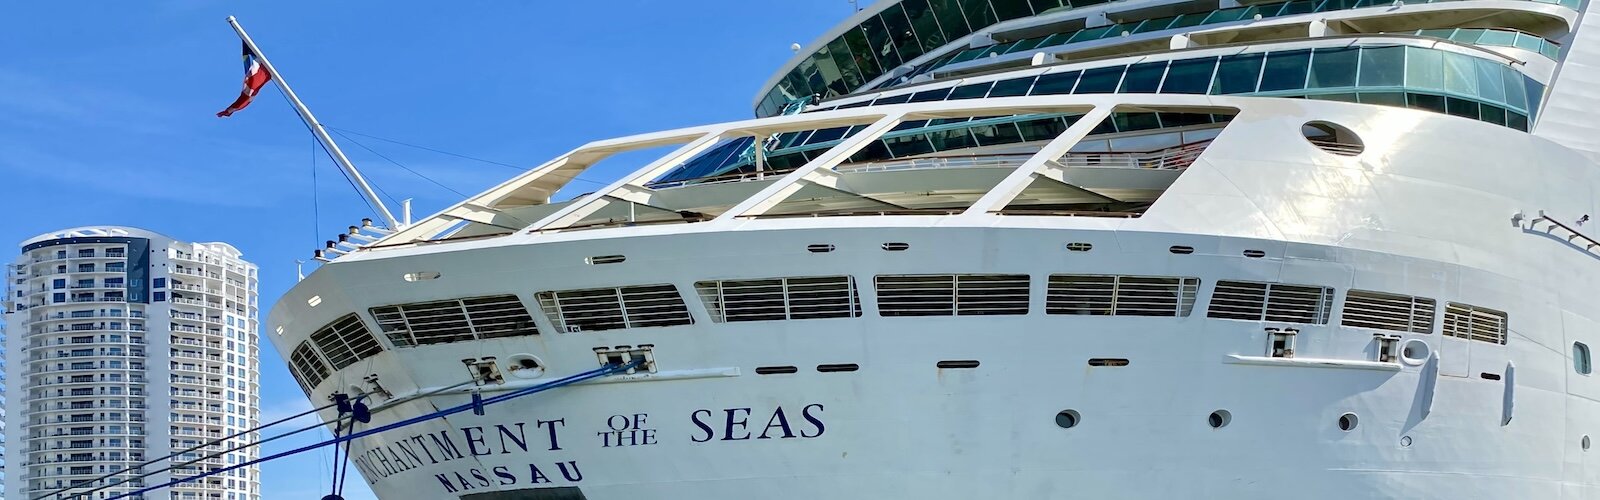 Enchantment of the Seas, a Royal Caribbean cruise ship with a capacity of about 3,000 passengers and crew, departs from the Channel District in downtown Tampa.